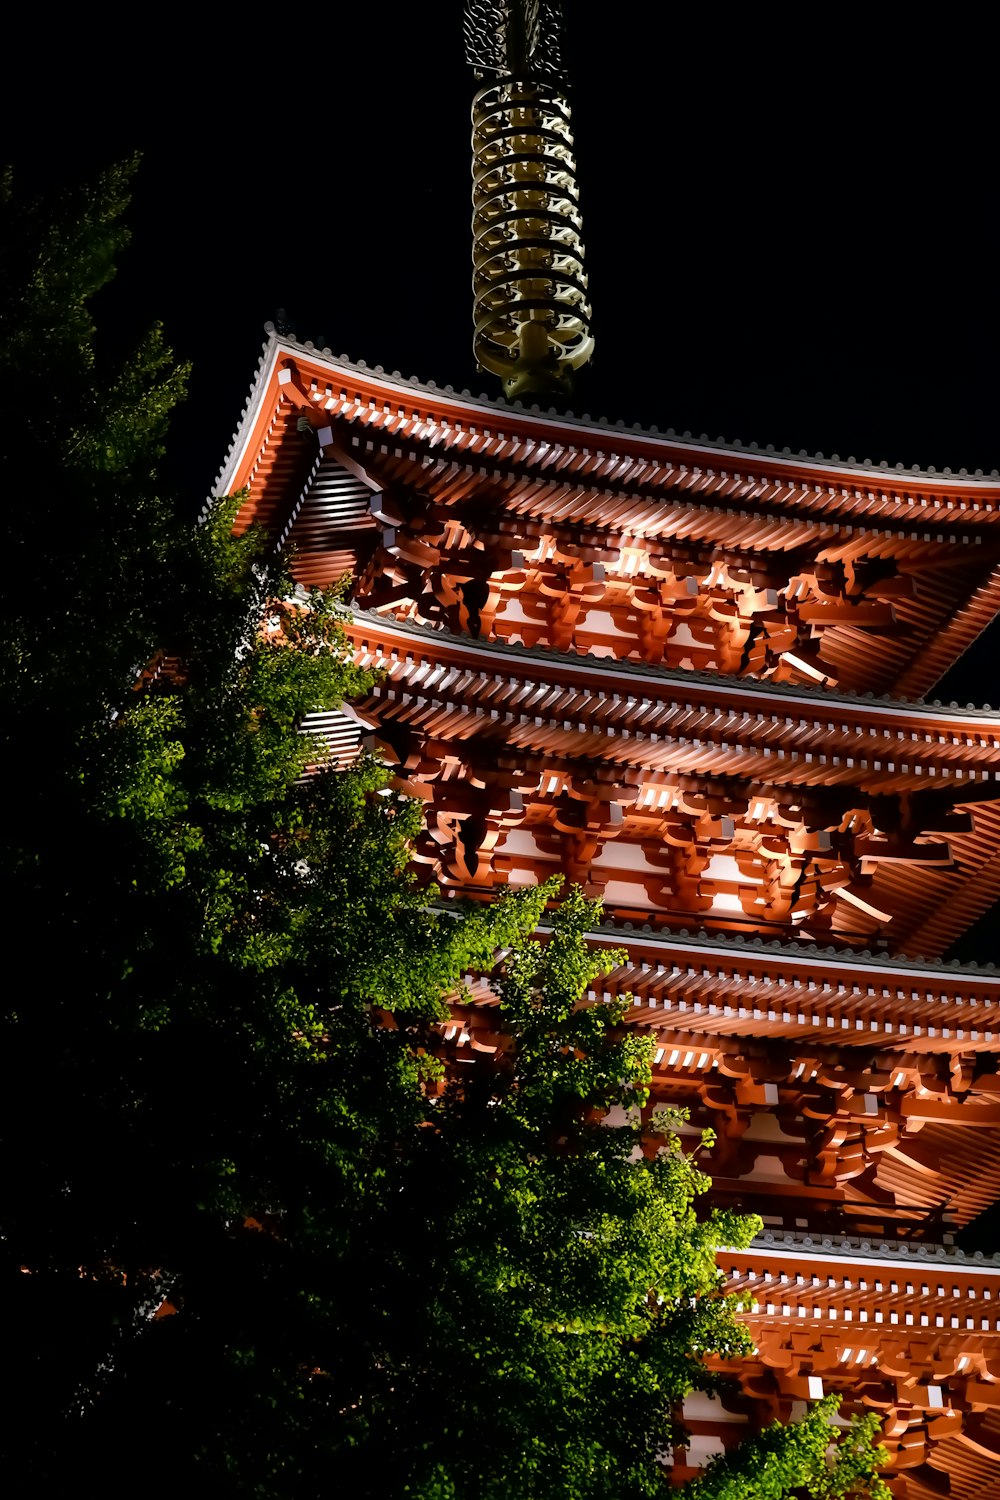 brown wooden temple surrounded by green trees during nighttime